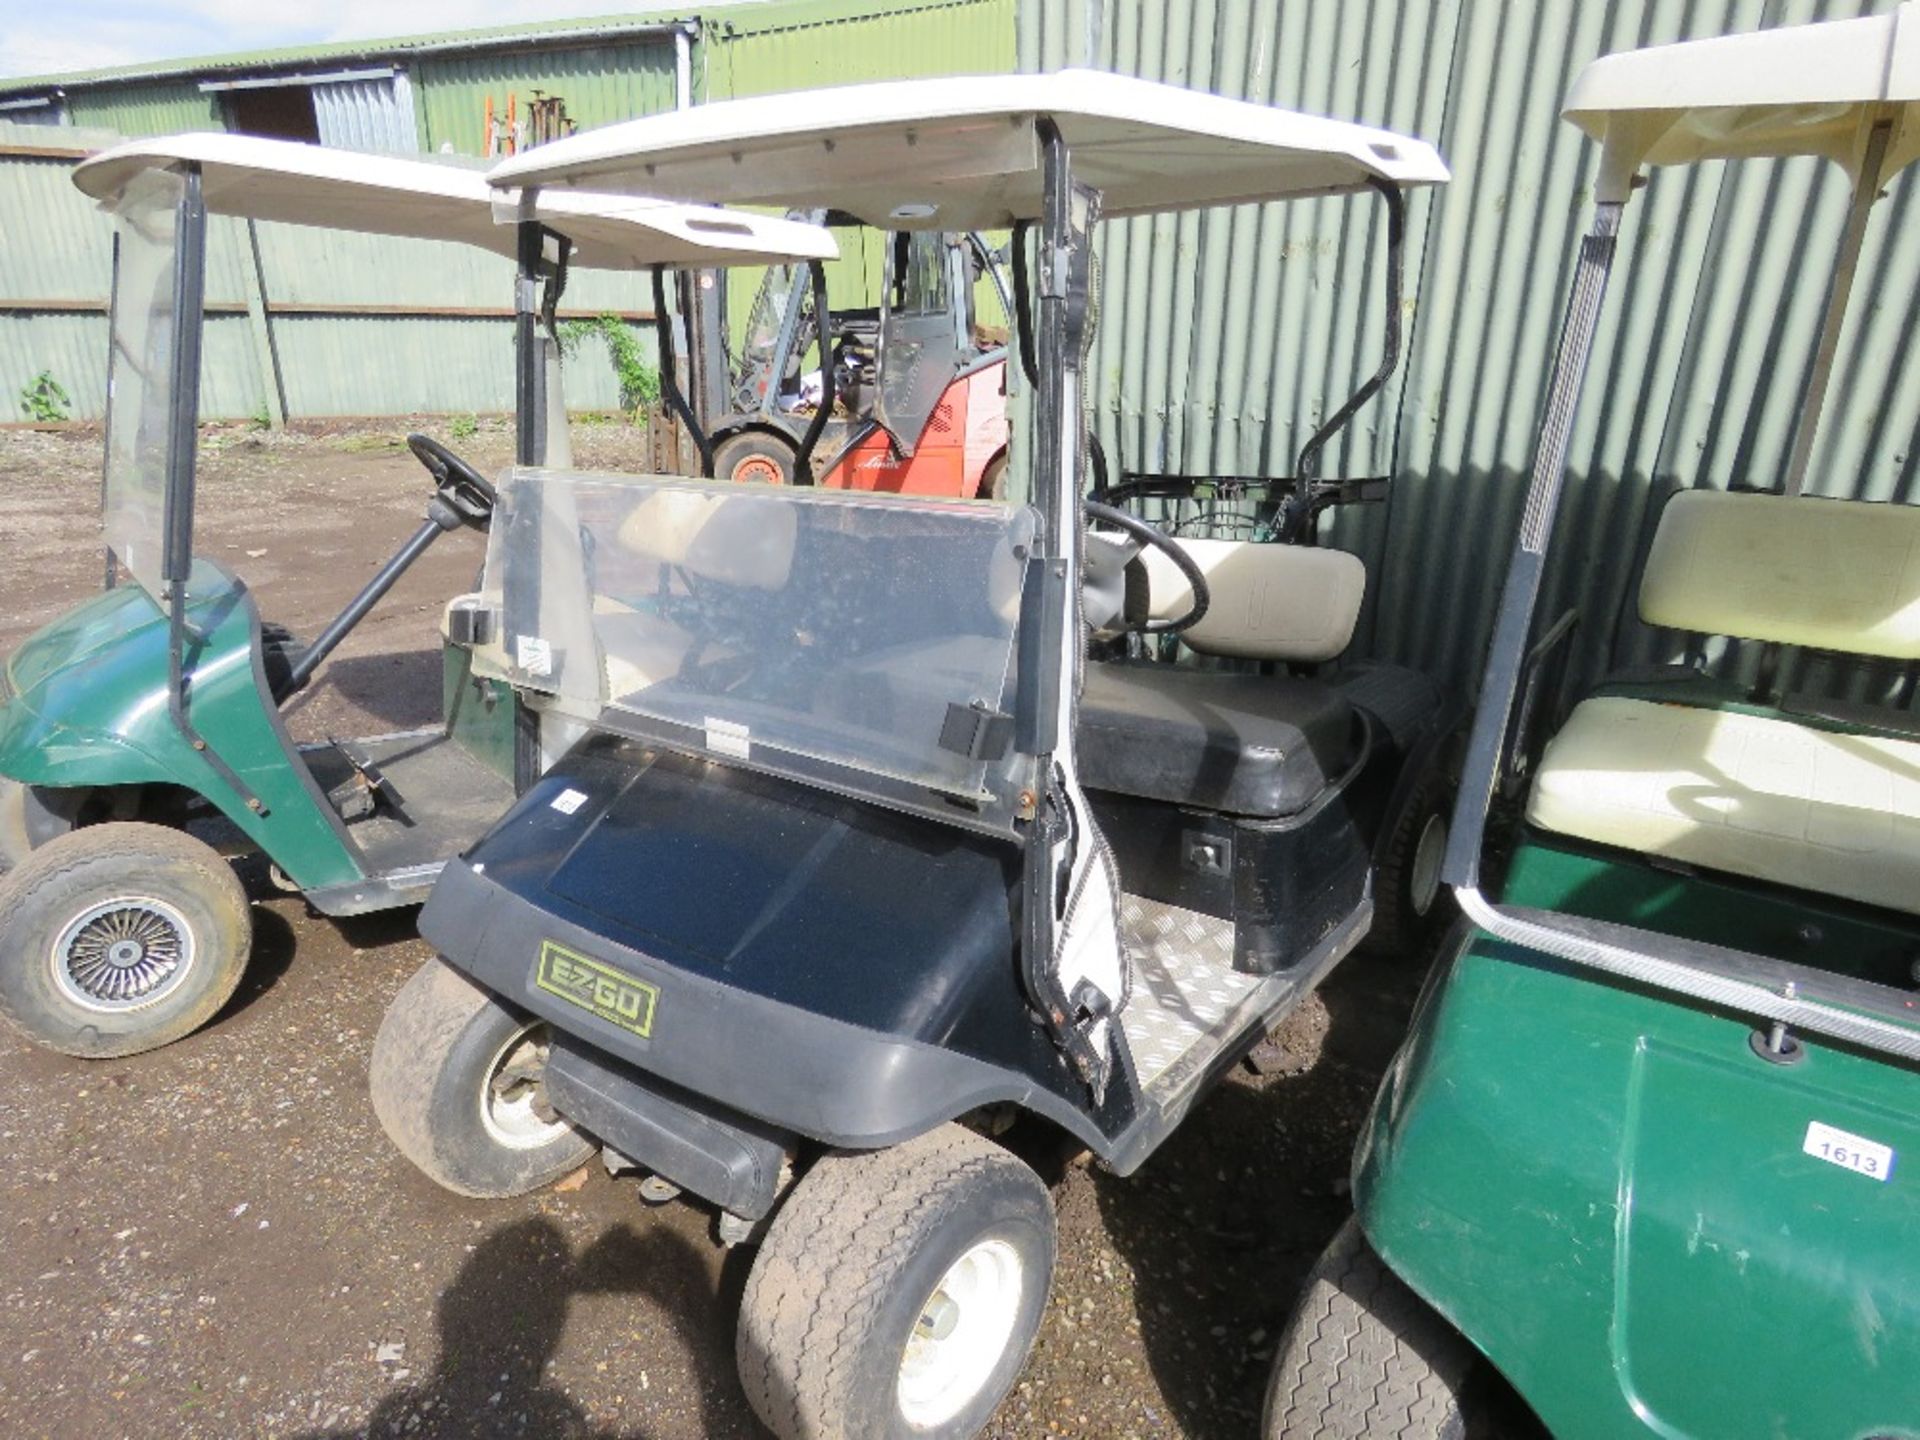 EZGO PETROL ENGINED GOLF BUGGY. BLACK COLOURED. WHEN TESTED WAS SEEN TO RUN, DRIVE, STEER AND BRAKE. - Image 3 of 7